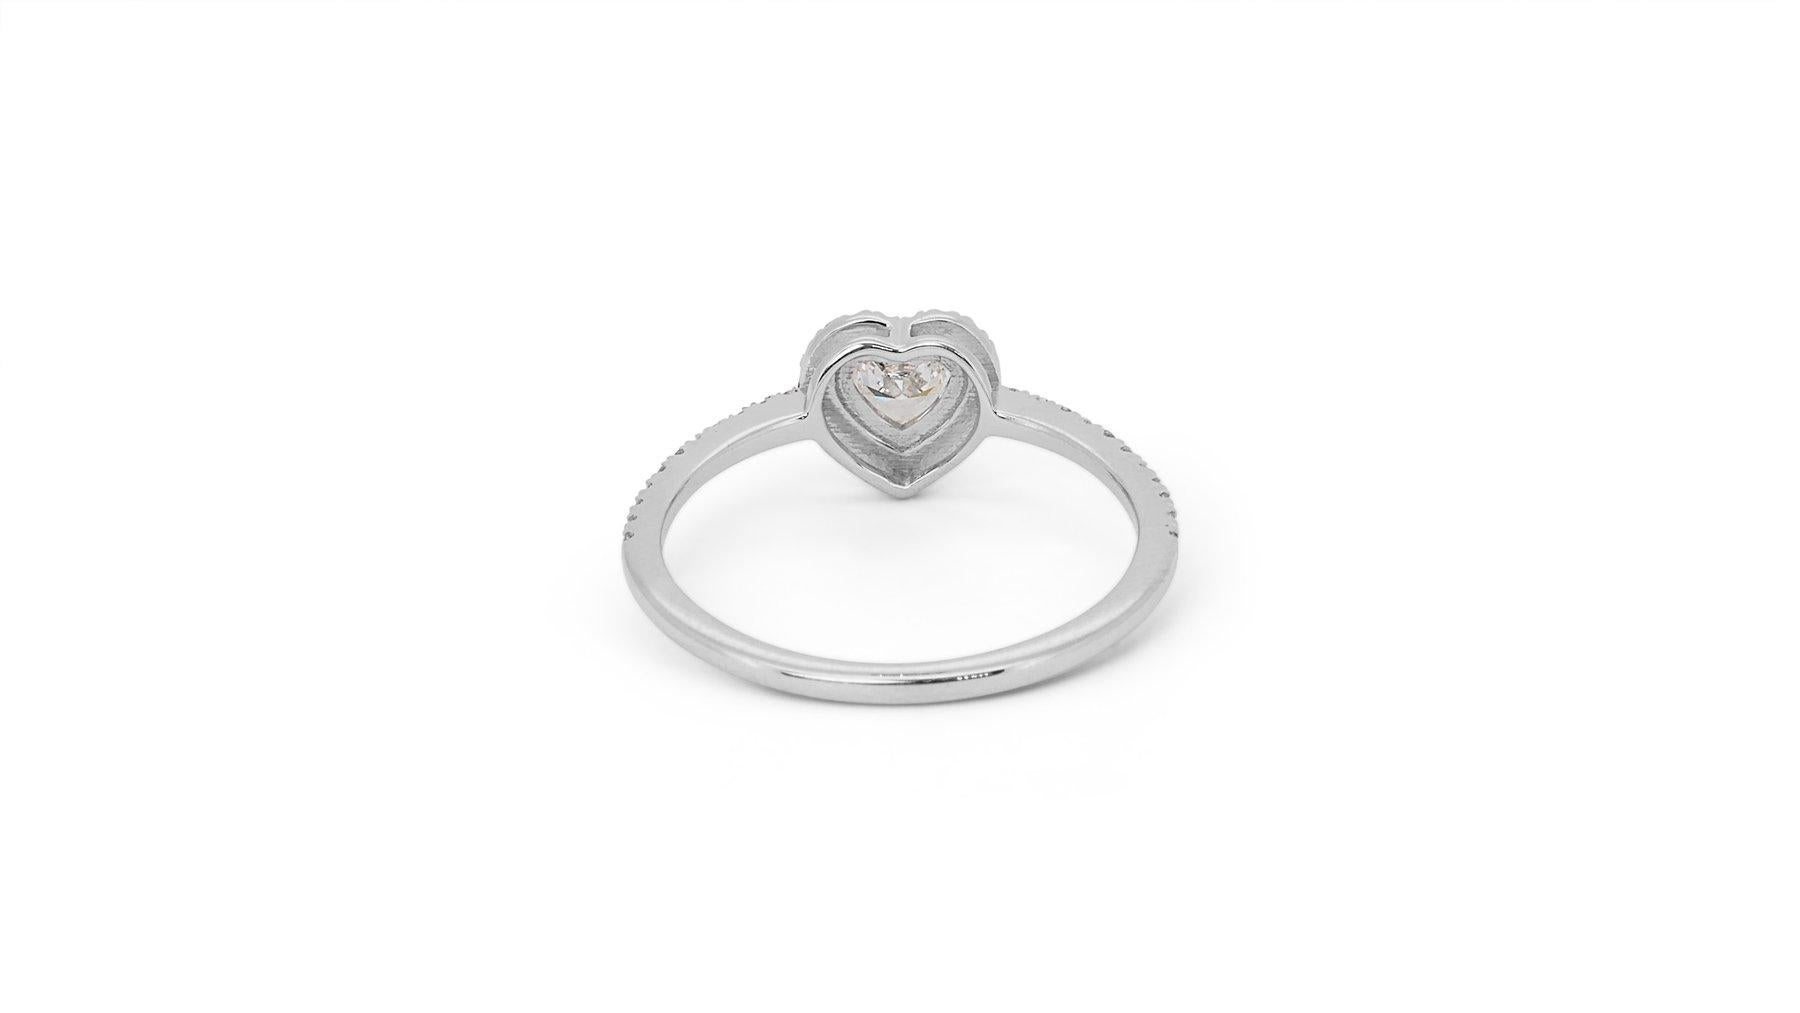 Lustrous 18K White Gold Pave Natural Heart Diamond Ring w/ 1.15ct- GIA Certified For Sale 1